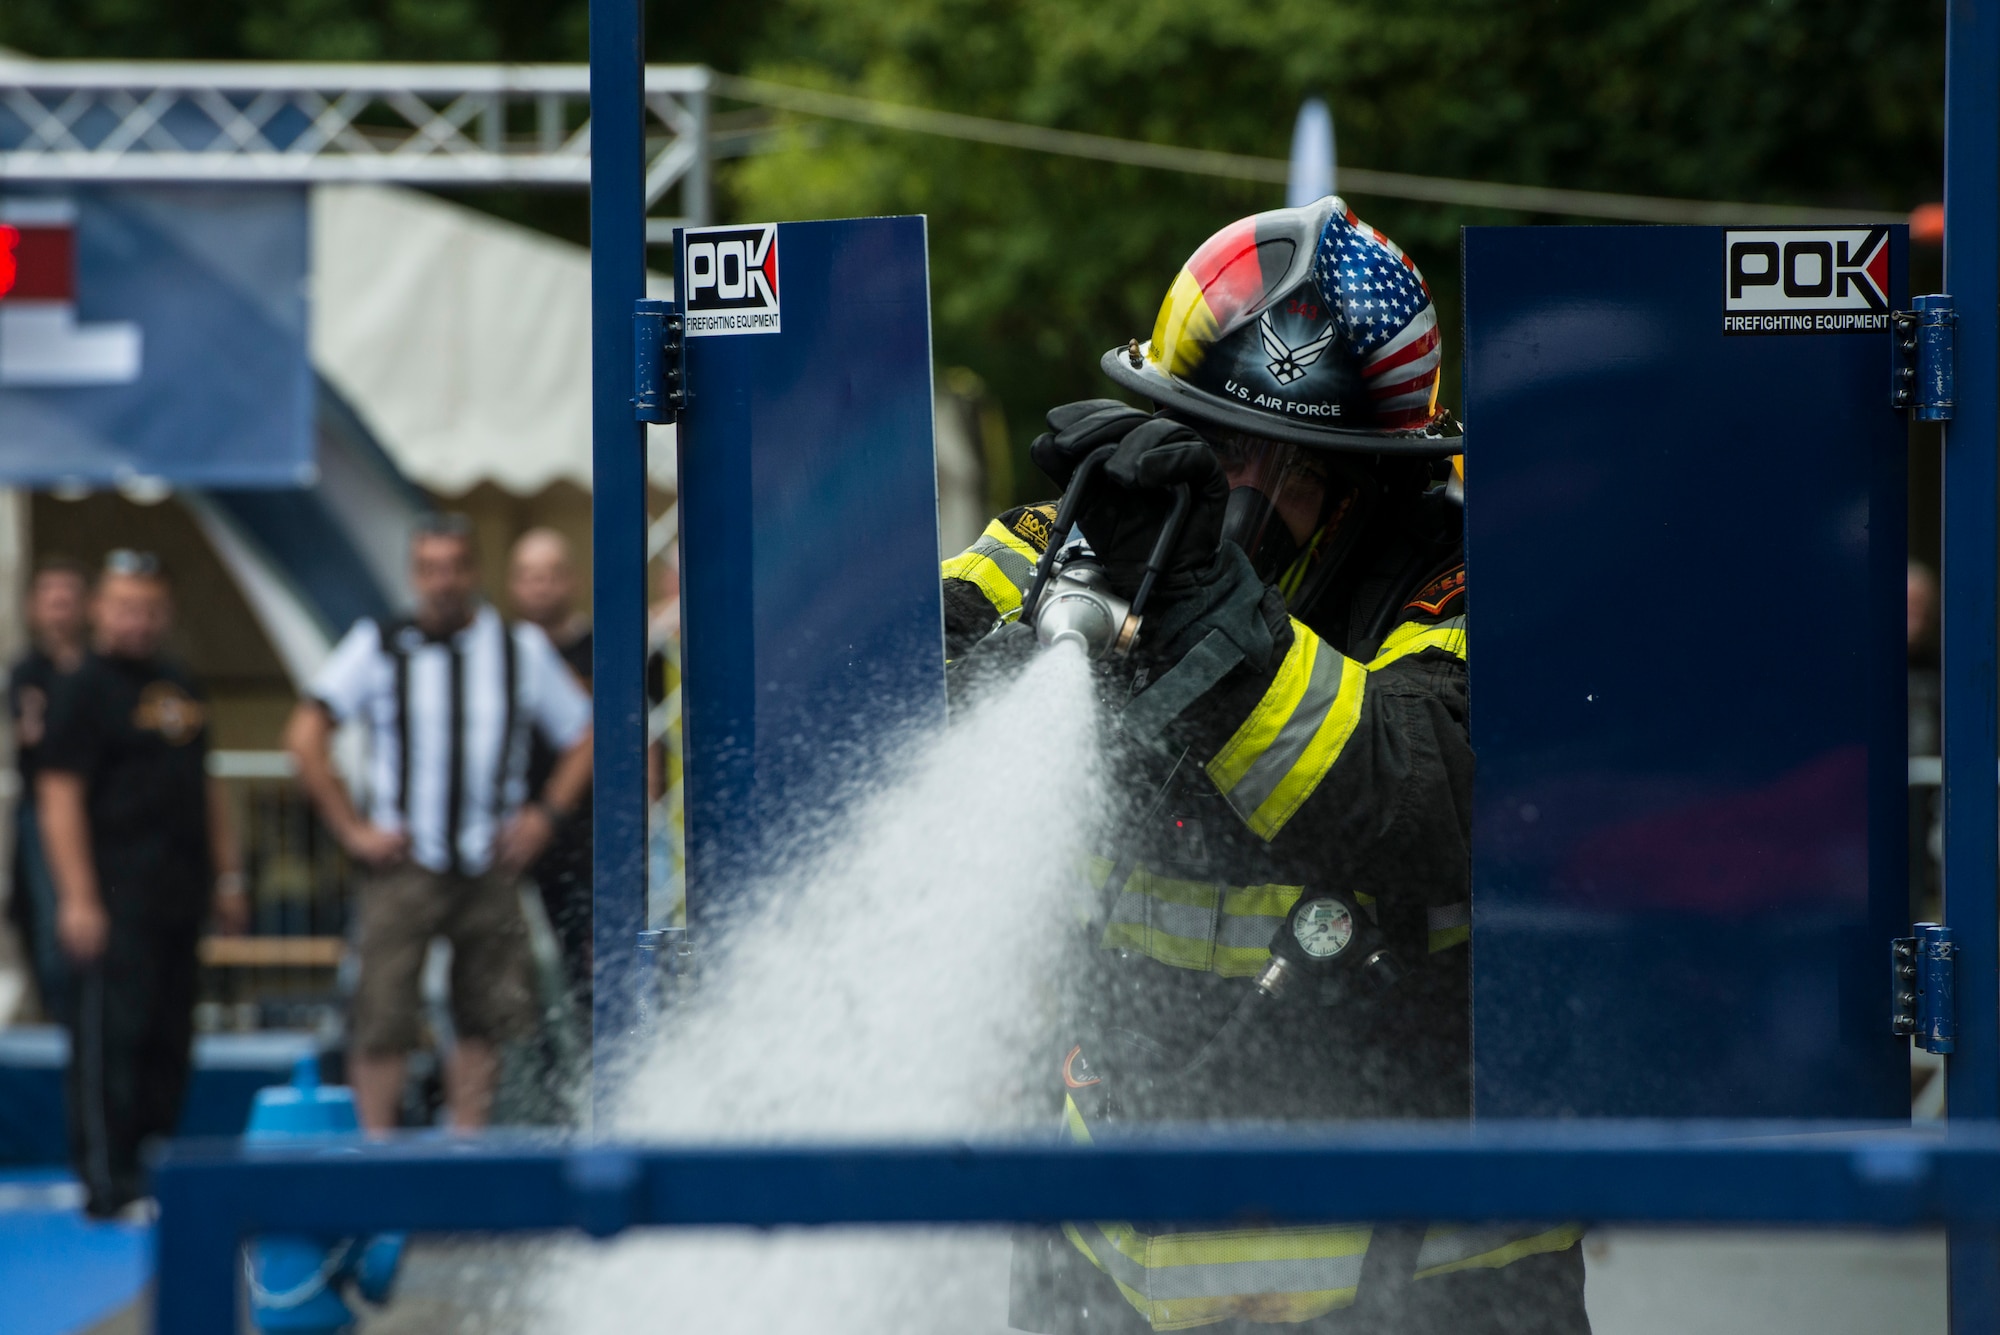 U.S. Air Force Senior Master Sgt. Jason Theriault, 52nd Civil Engineer Squadron deputy fire chief from Gloucester, Mass., sprays water to extinguish a simulated fire at the first Mosel Firefighter Combat Challenge in Ediger-Eller, Germany, July 5, 2014. Theriault carried hose 78 feet crossed a simulated door to a building and turned on the hose to extinguish the fire. (U.S. Air Force photo by Staff Sgt. Christopher Ruano/Released)